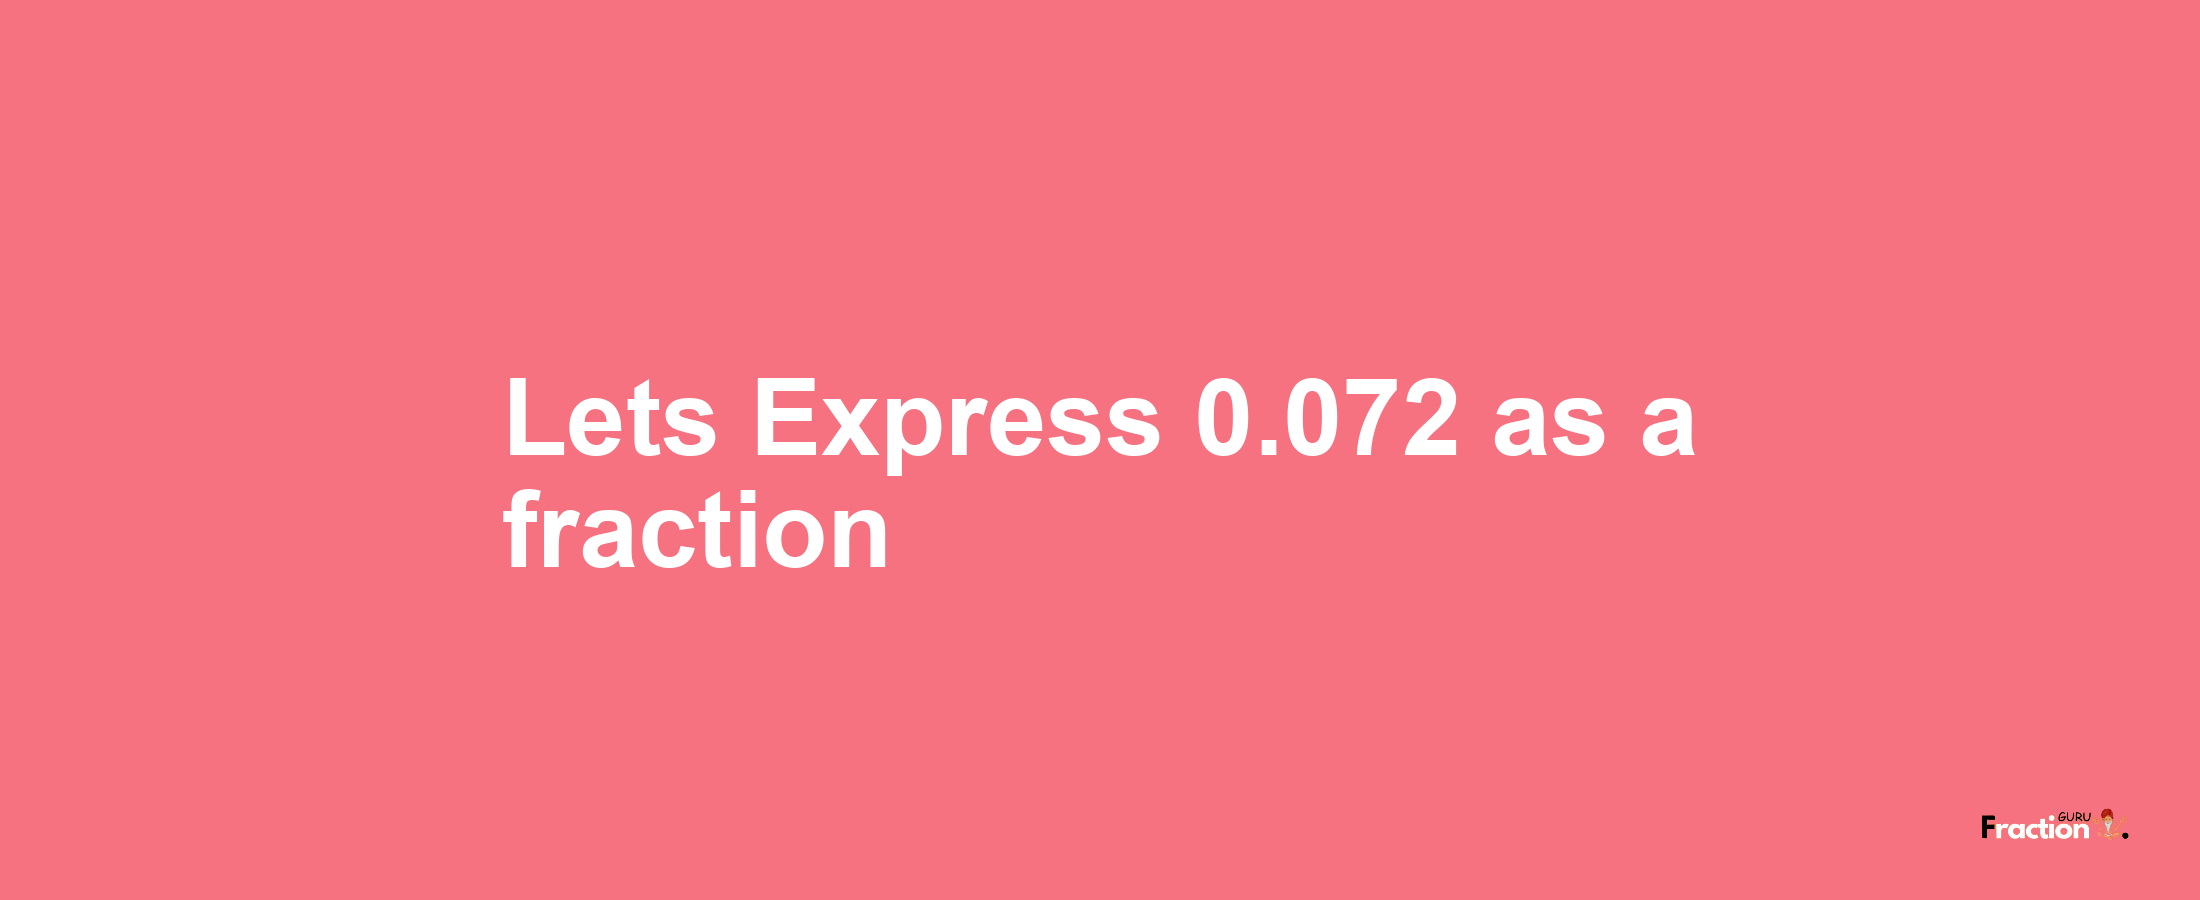 Lets Express 0.072 as afraction